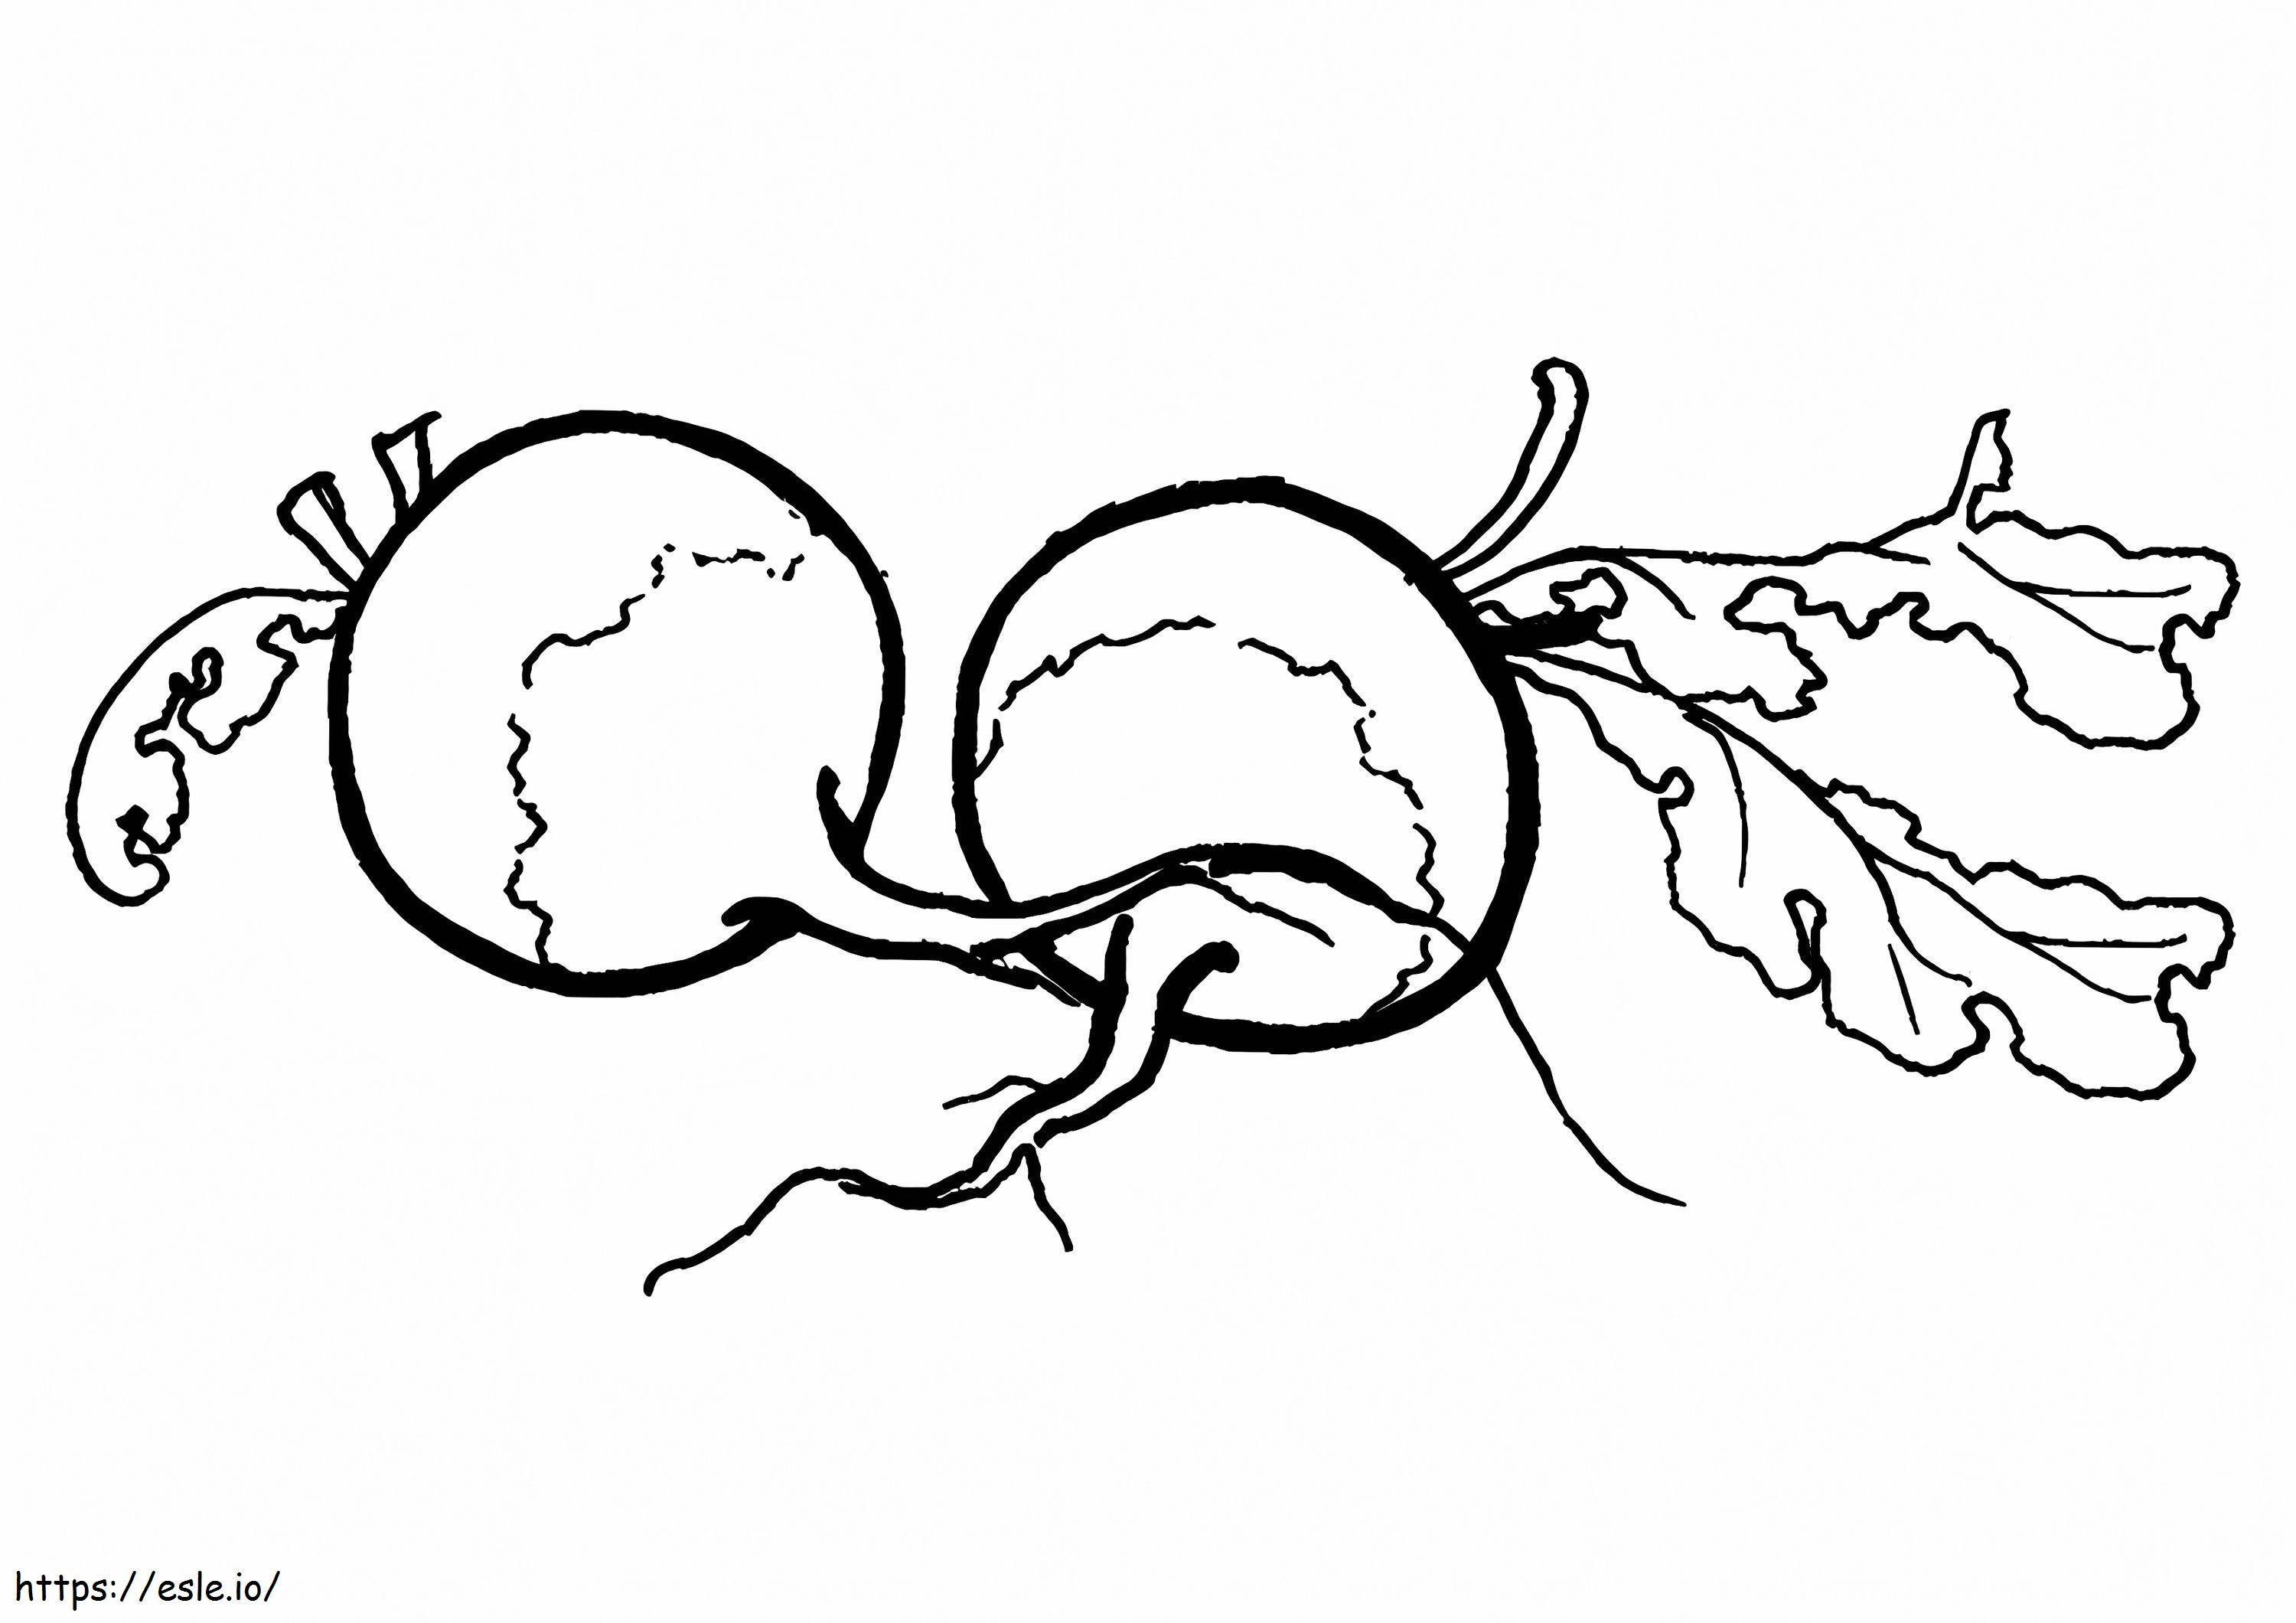 The Beetroots A4 E1600560223938 coloring page